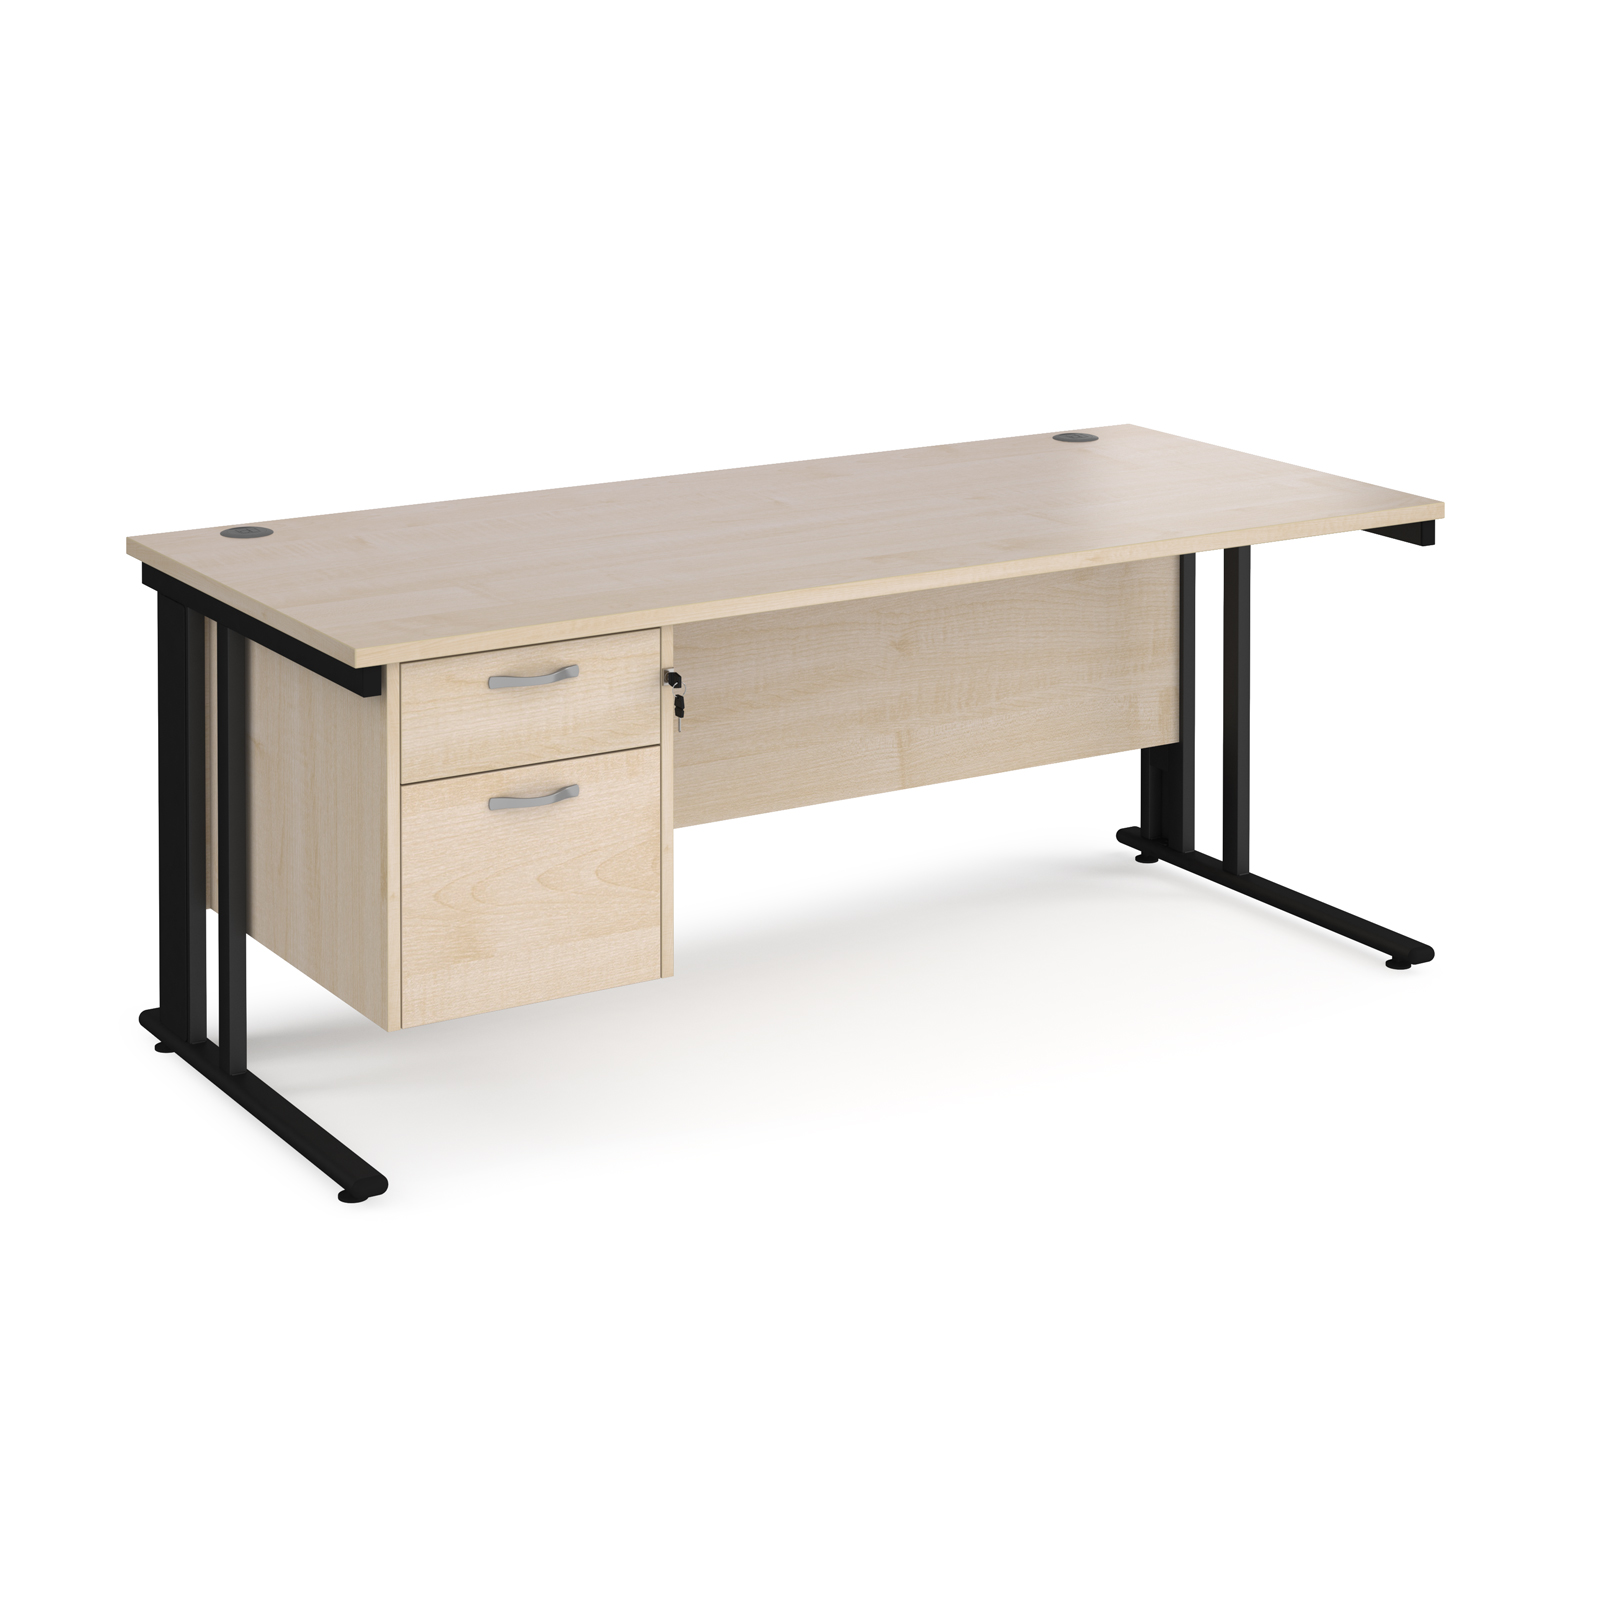 Maestro 25 straight desk 1800mm x 800mm with 2 drawer pedestal - black cable managed leg frame, maple top